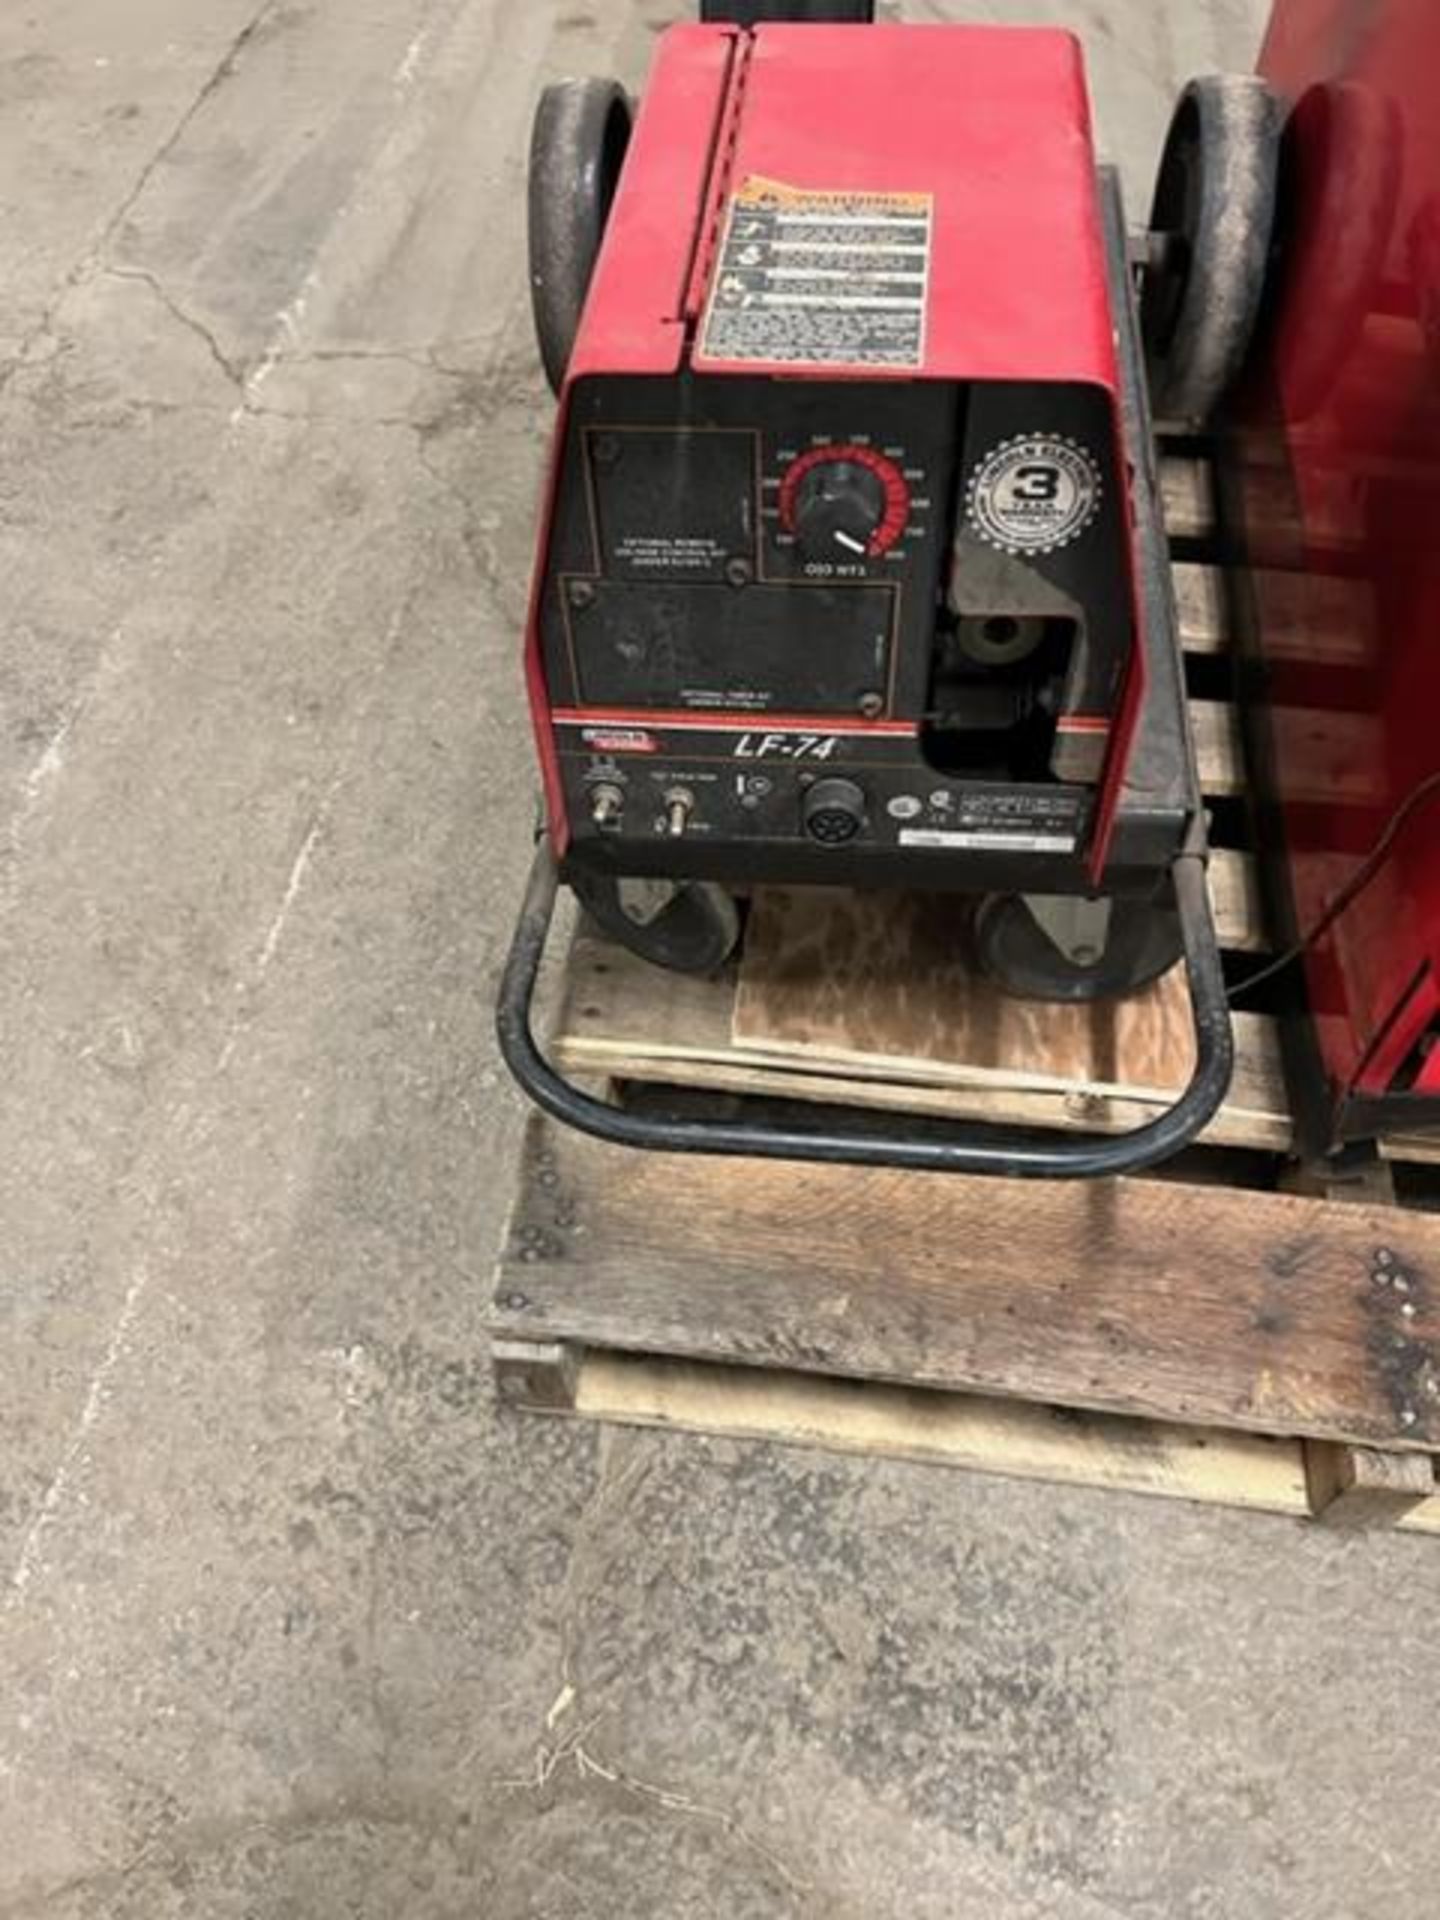 Lincoln Model CV-655 650 Amp Mig Welder with LF-74 Wire Feeder on Cart - Image 2 of 3